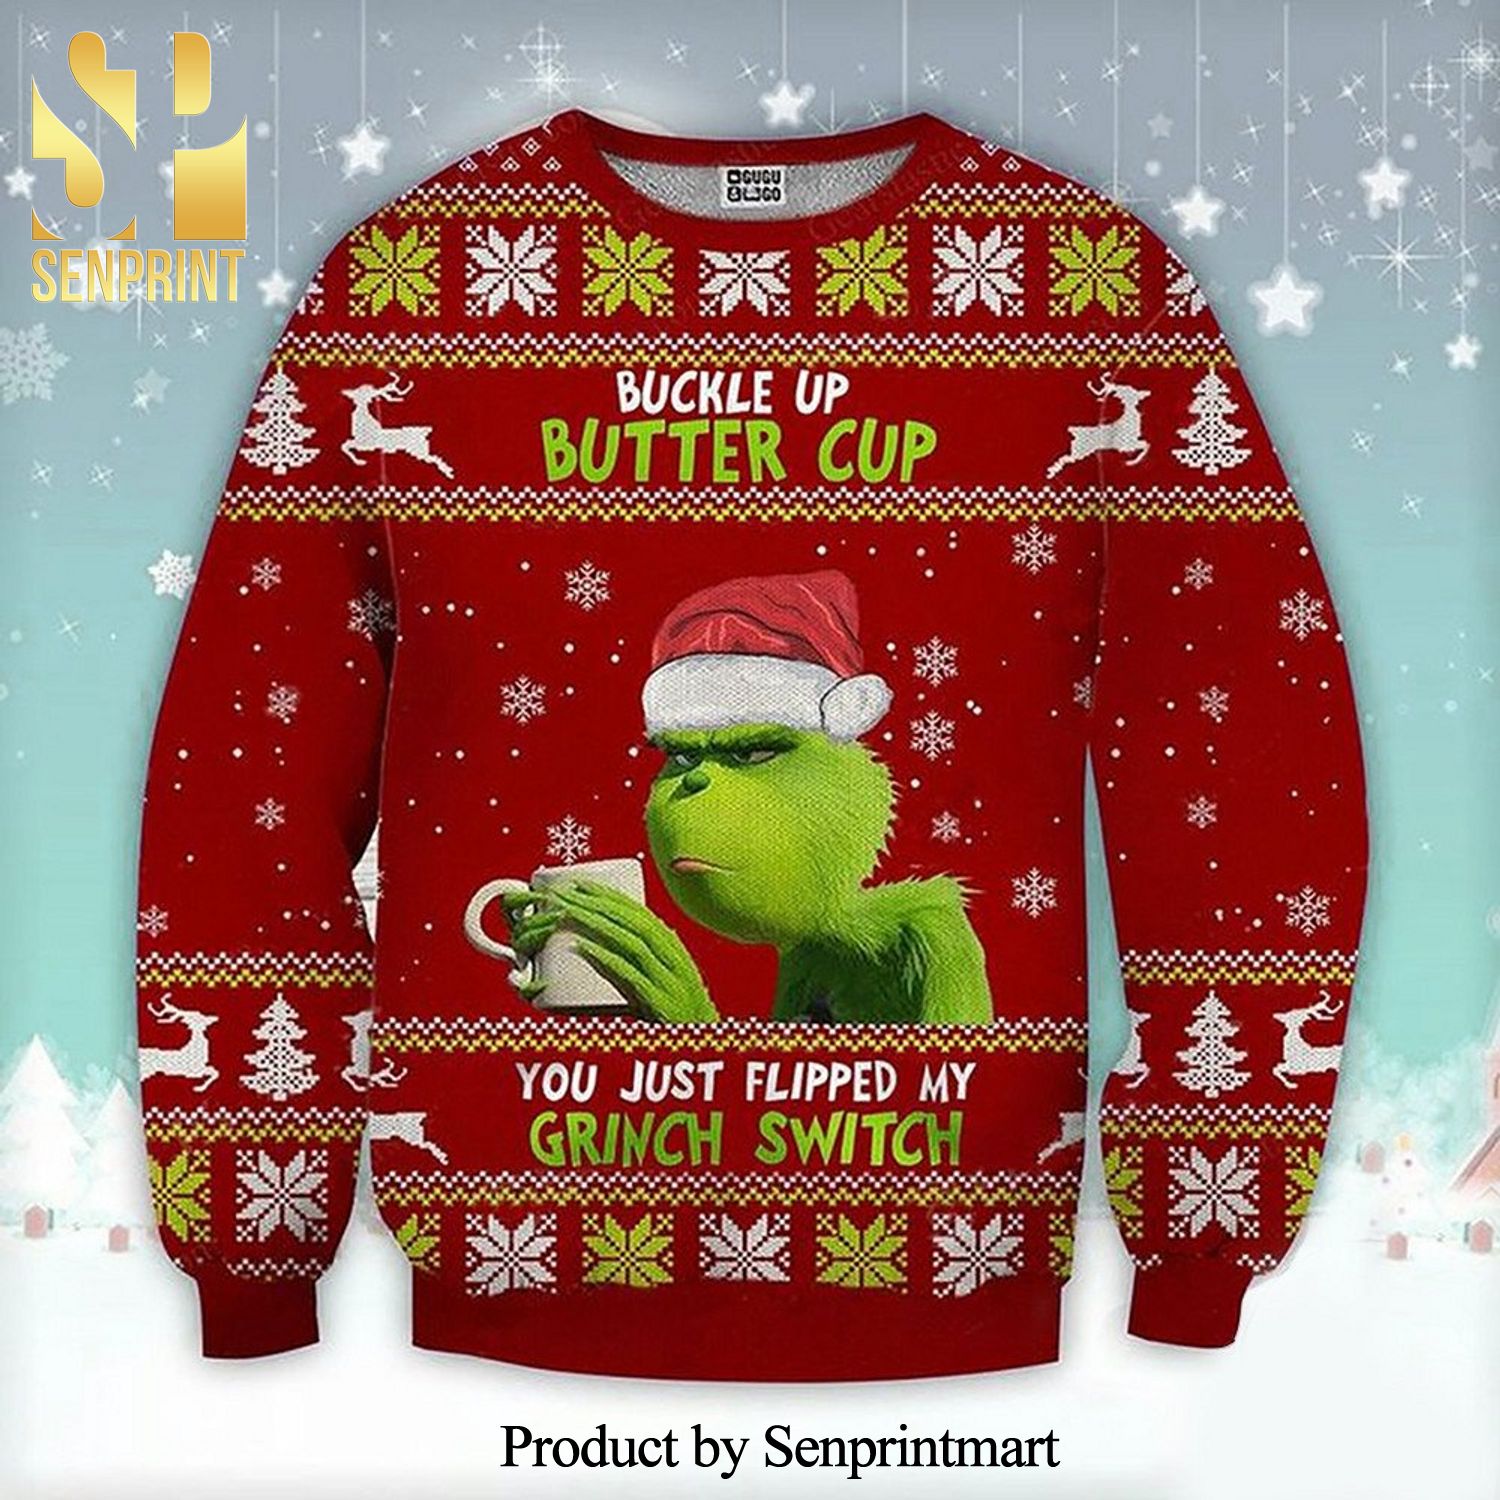 Buckle Up Buttercup You Just Flipped My Grinch Switch Knitted Ugly Christmas Sweater